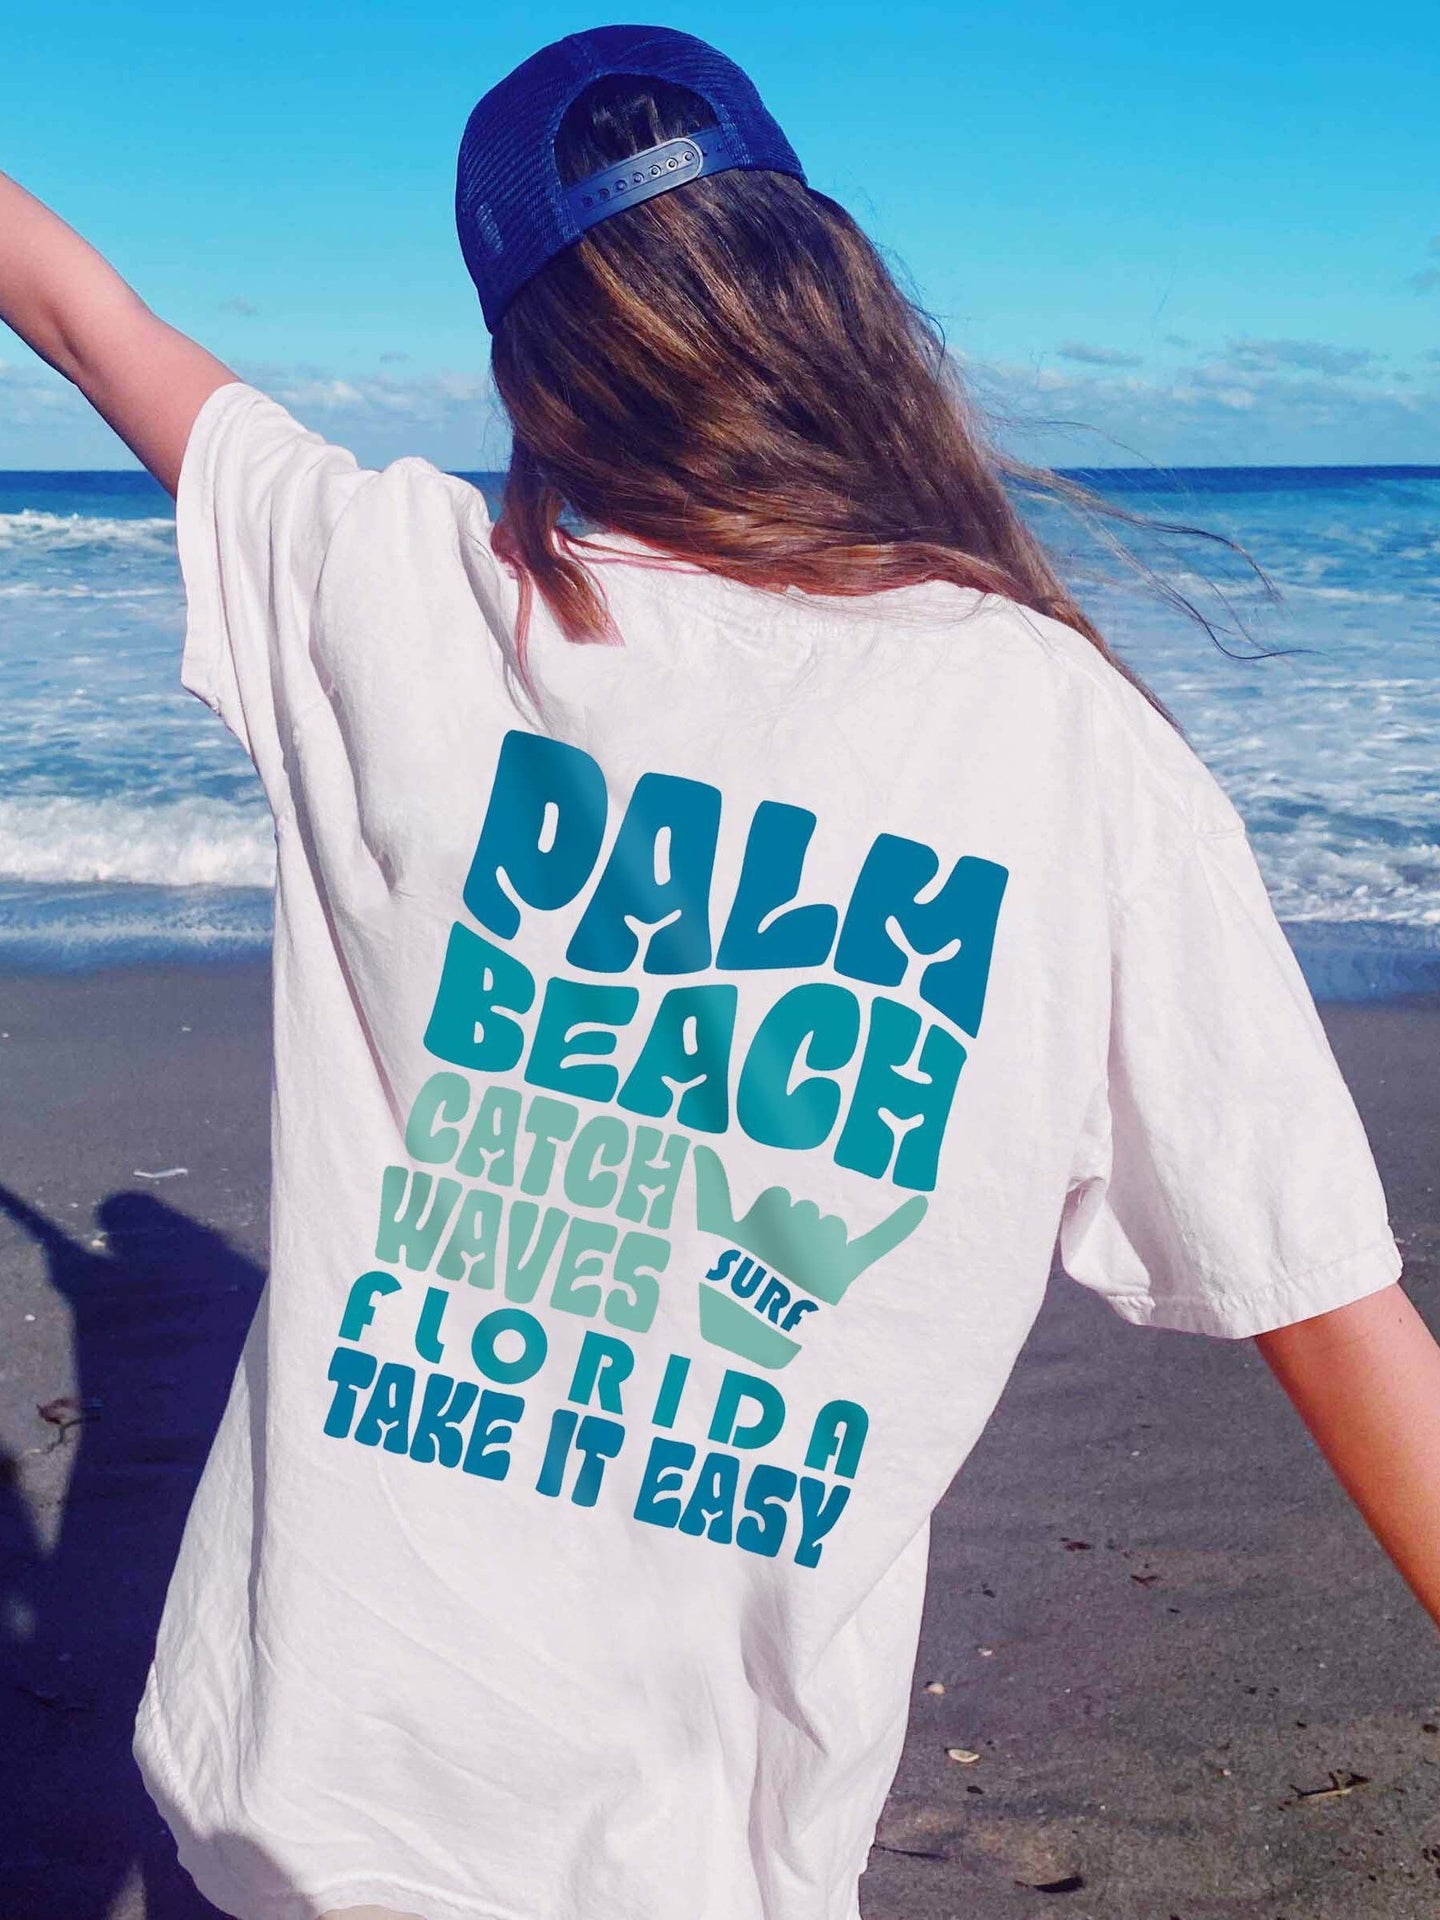 Ladies Palm Beach Catch Waves Surf Florida Take It Easy Printed Oversized T-Shirt